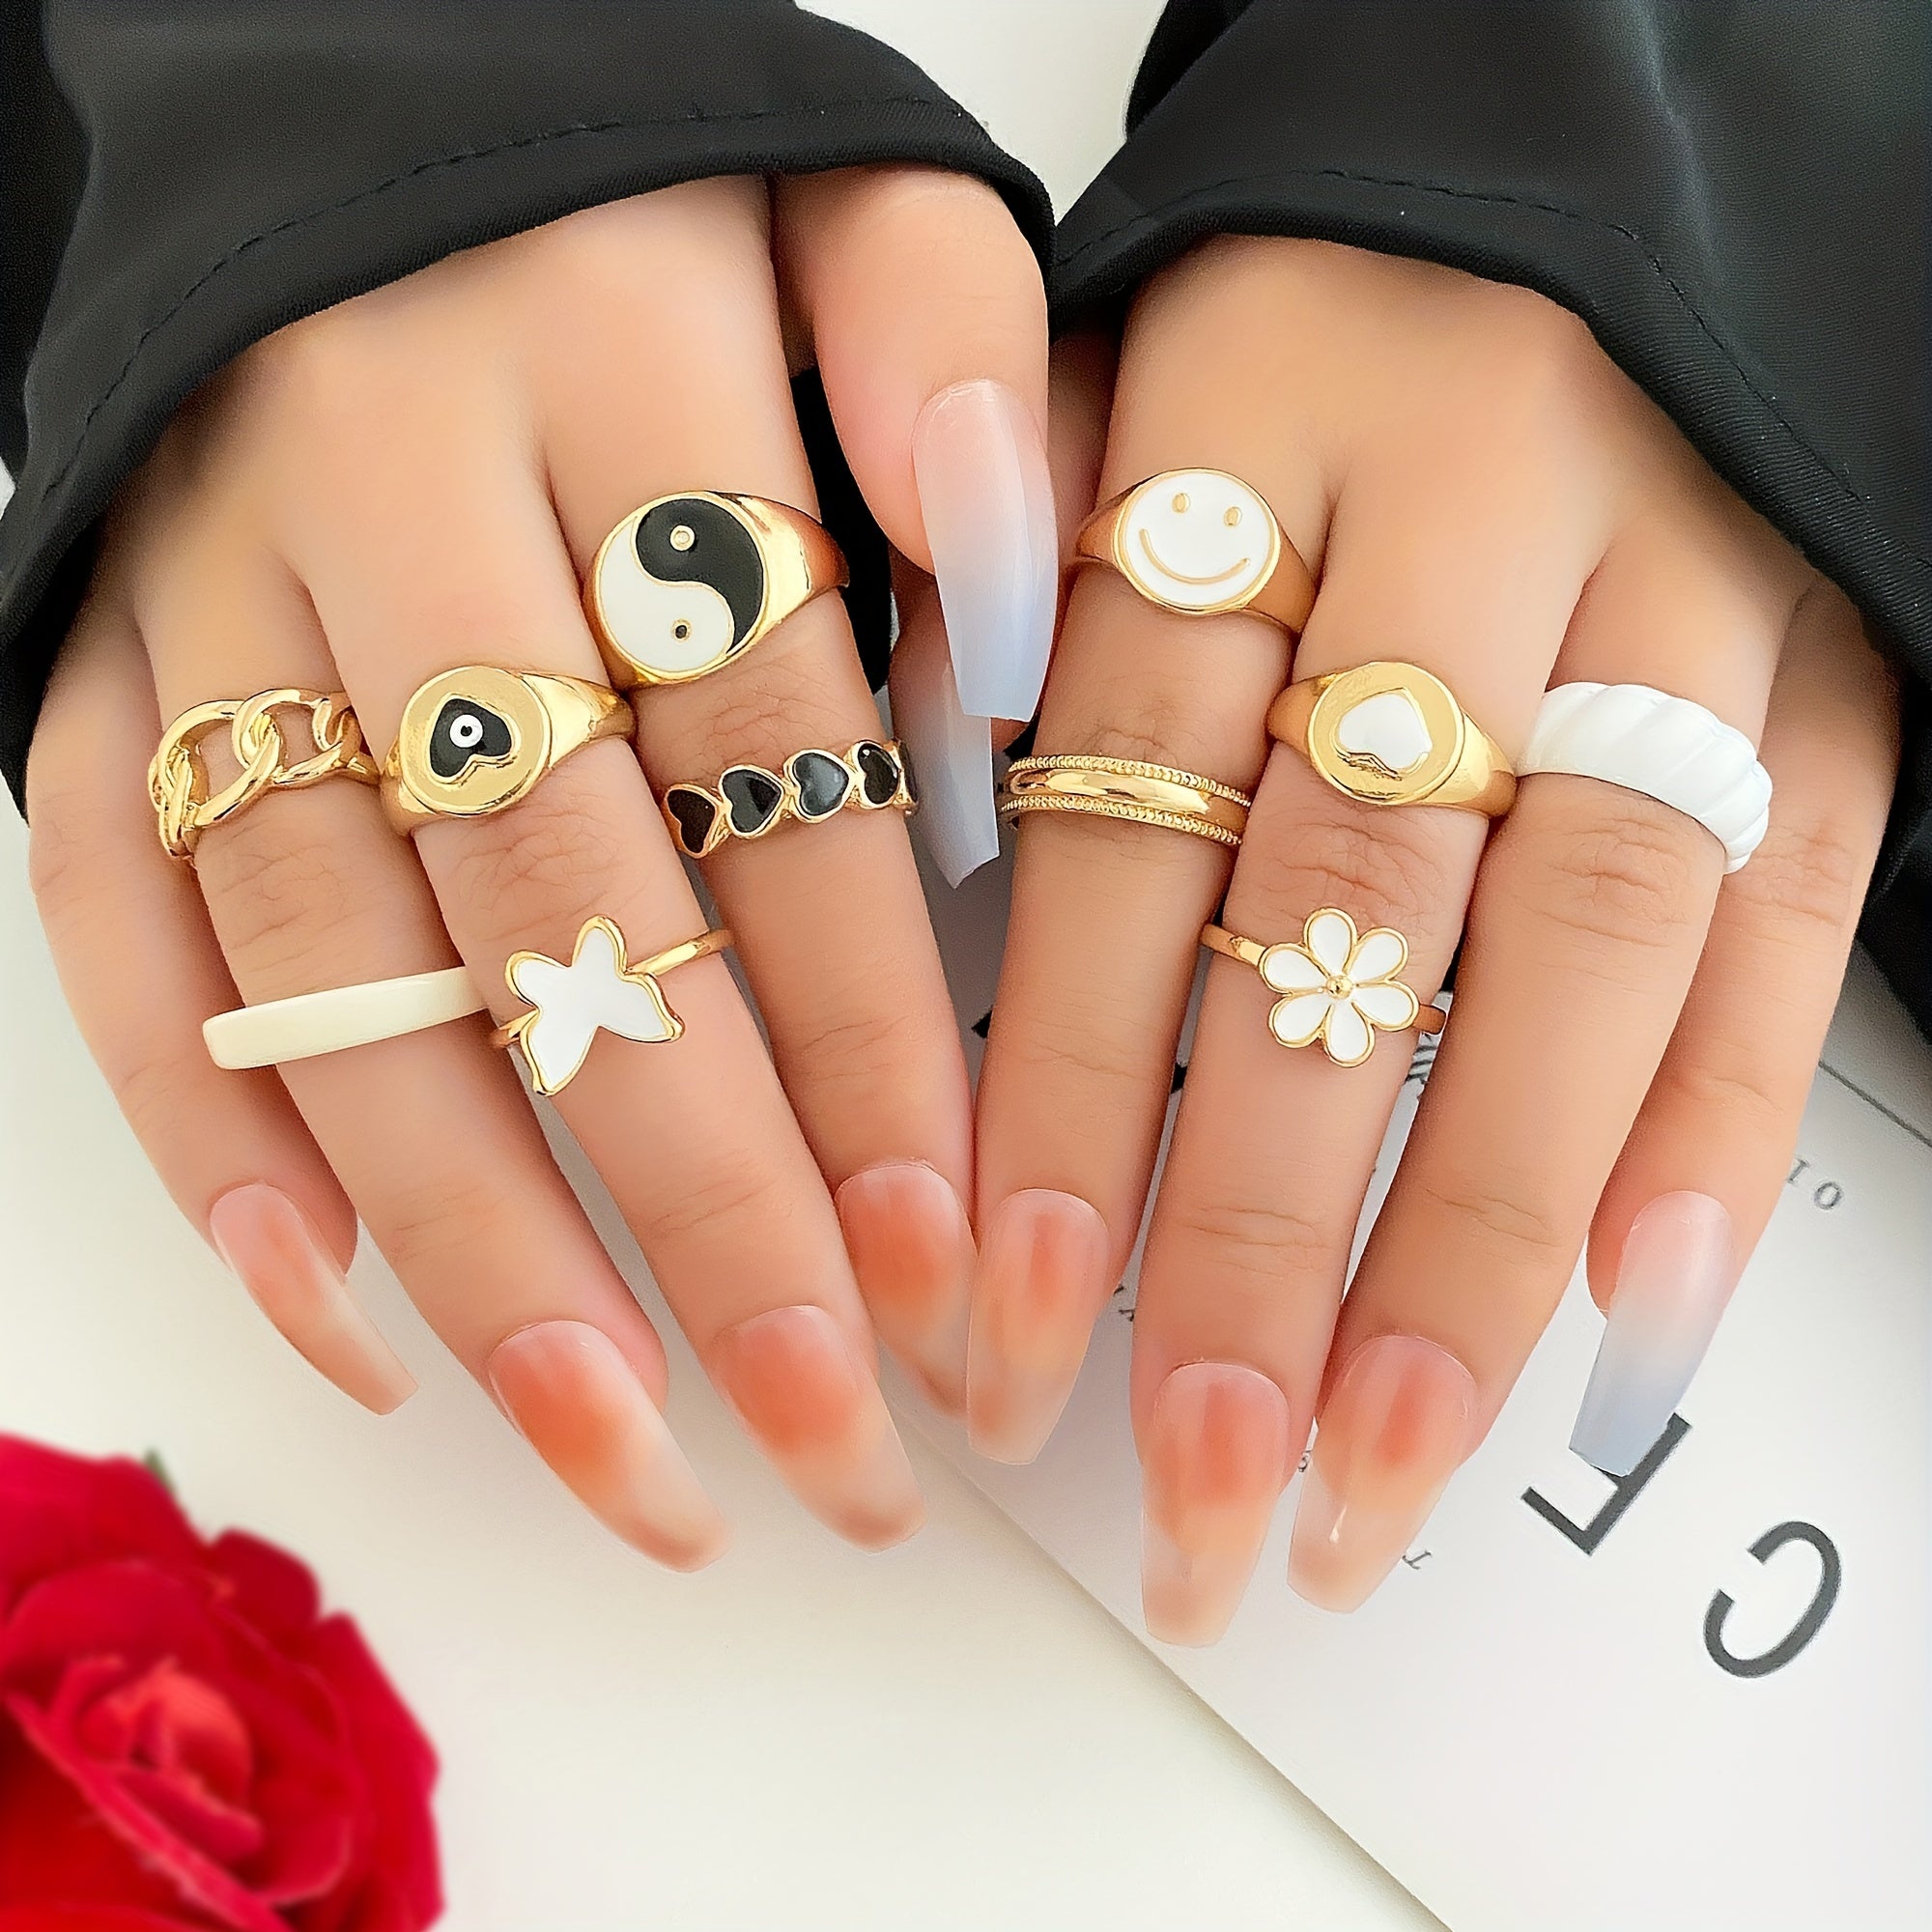 Y2k Style Stacking Rings Trendy Butterfly Flower Chain Patterns Mix And Match For Daily Outfits Party Accessories Weart Them And Be Your Own Star